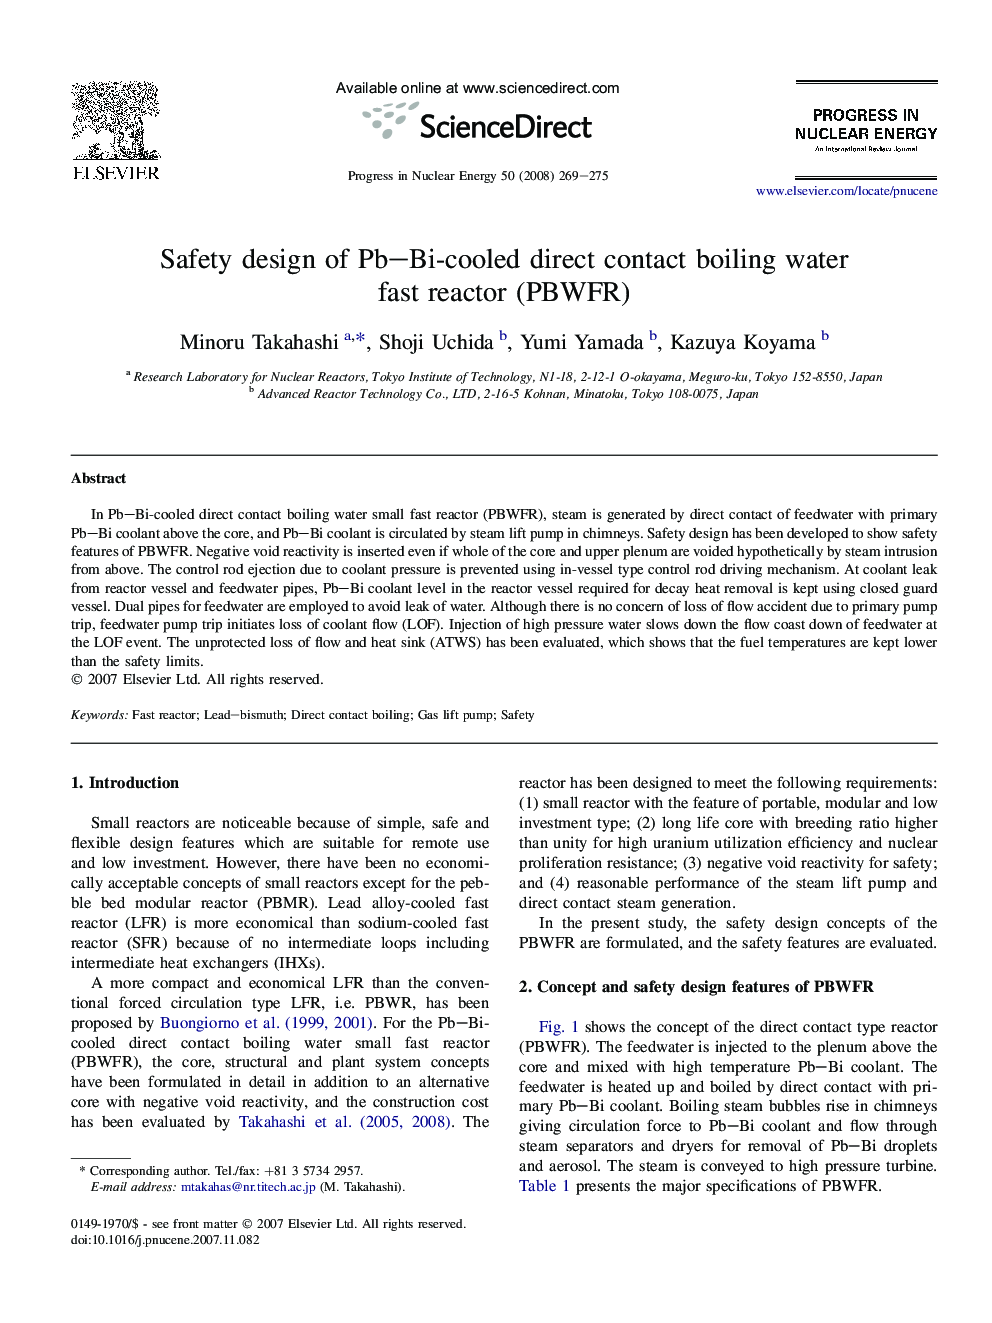 Safety design of Pb–Bi-cooled direct contact boiling water fast reactor (PBWFR)